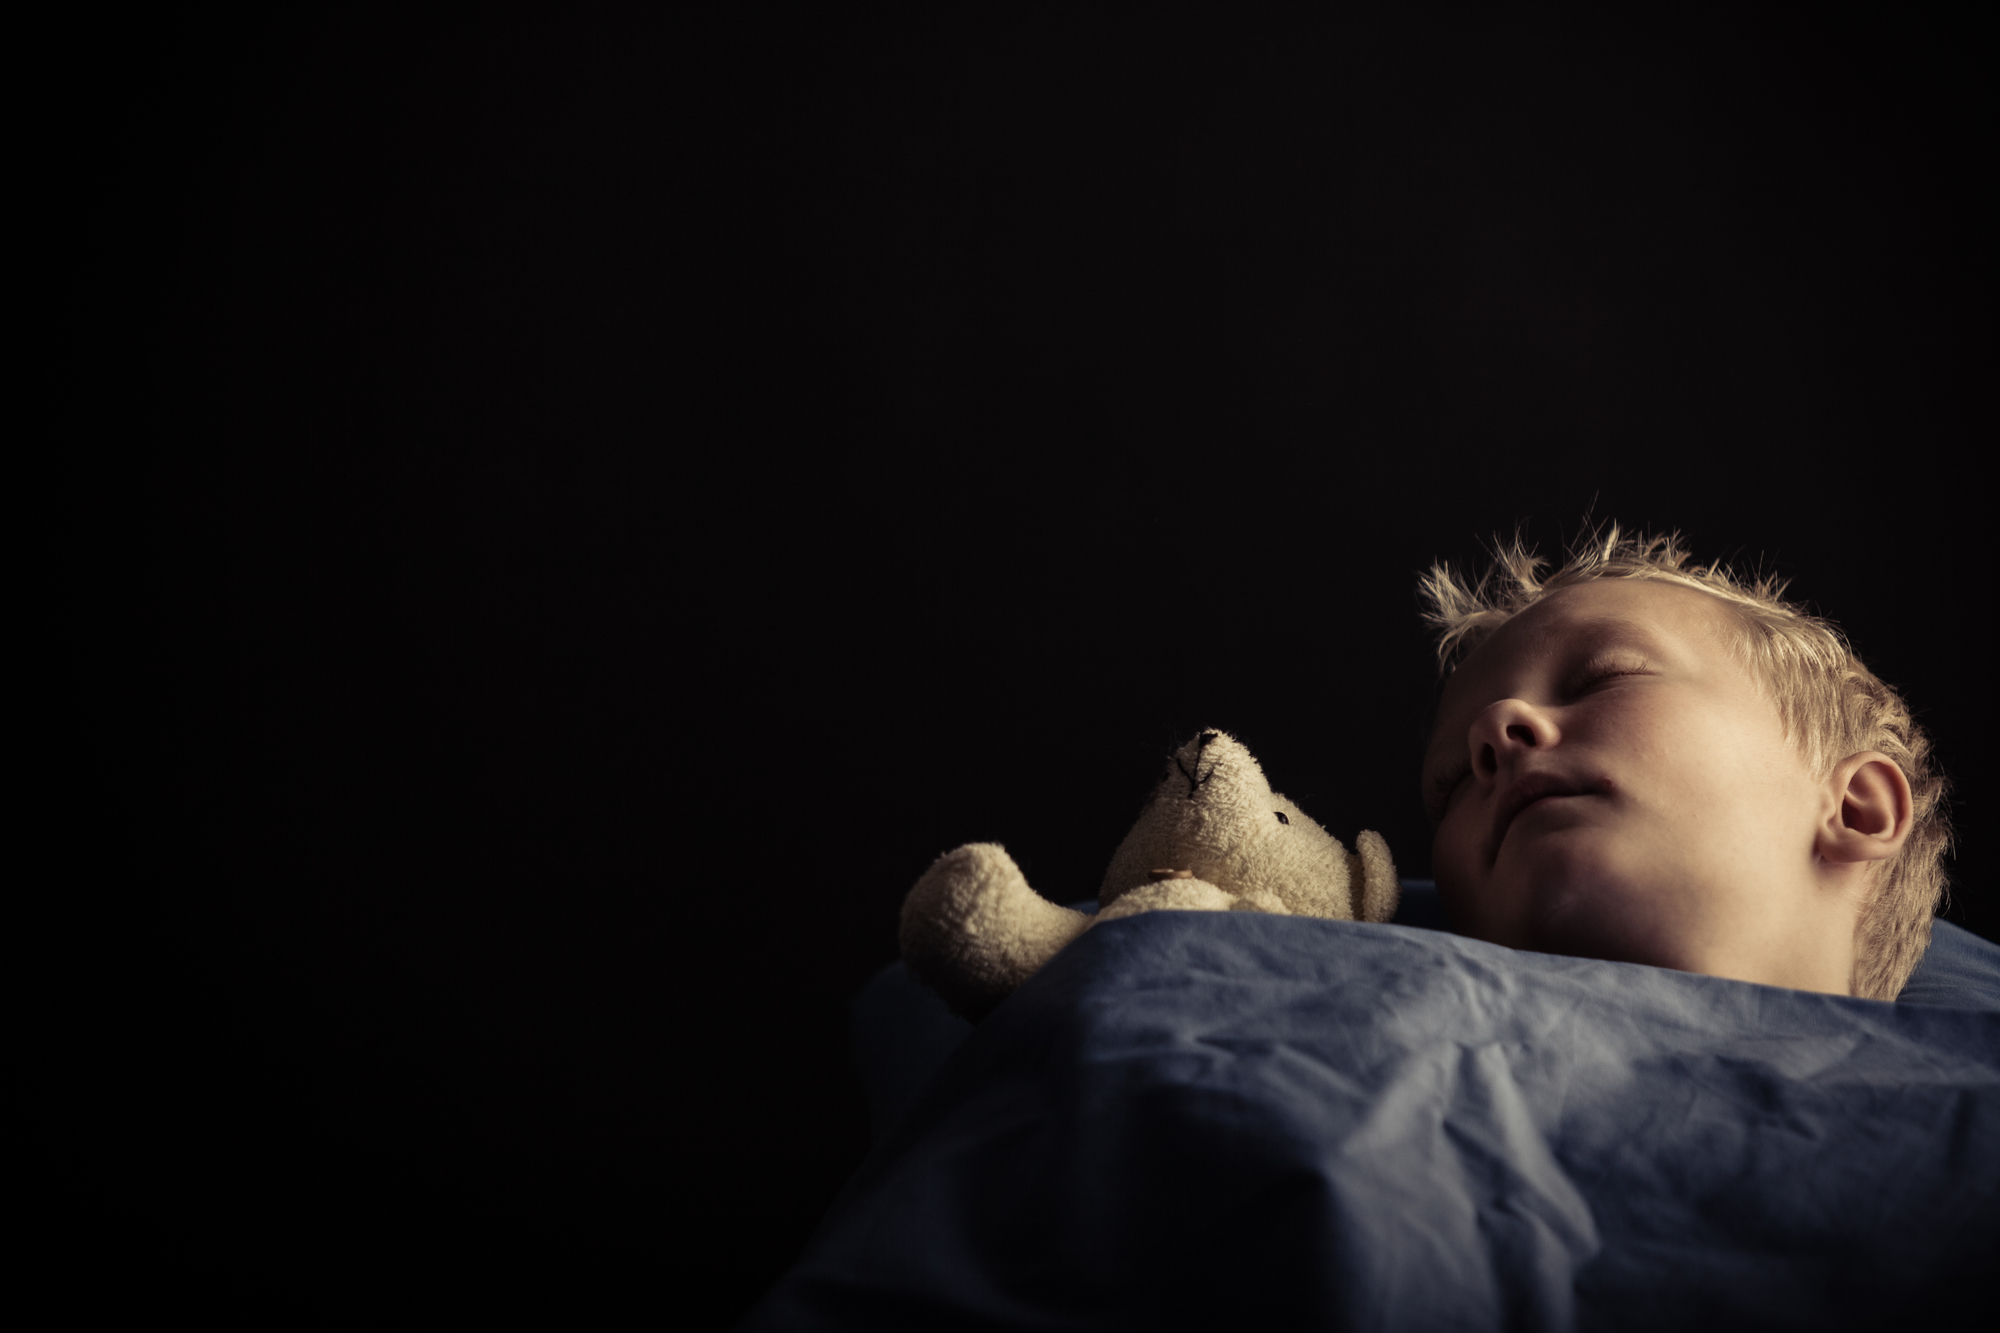 Children with autism or ADHD often sleep better with weighted blankets.